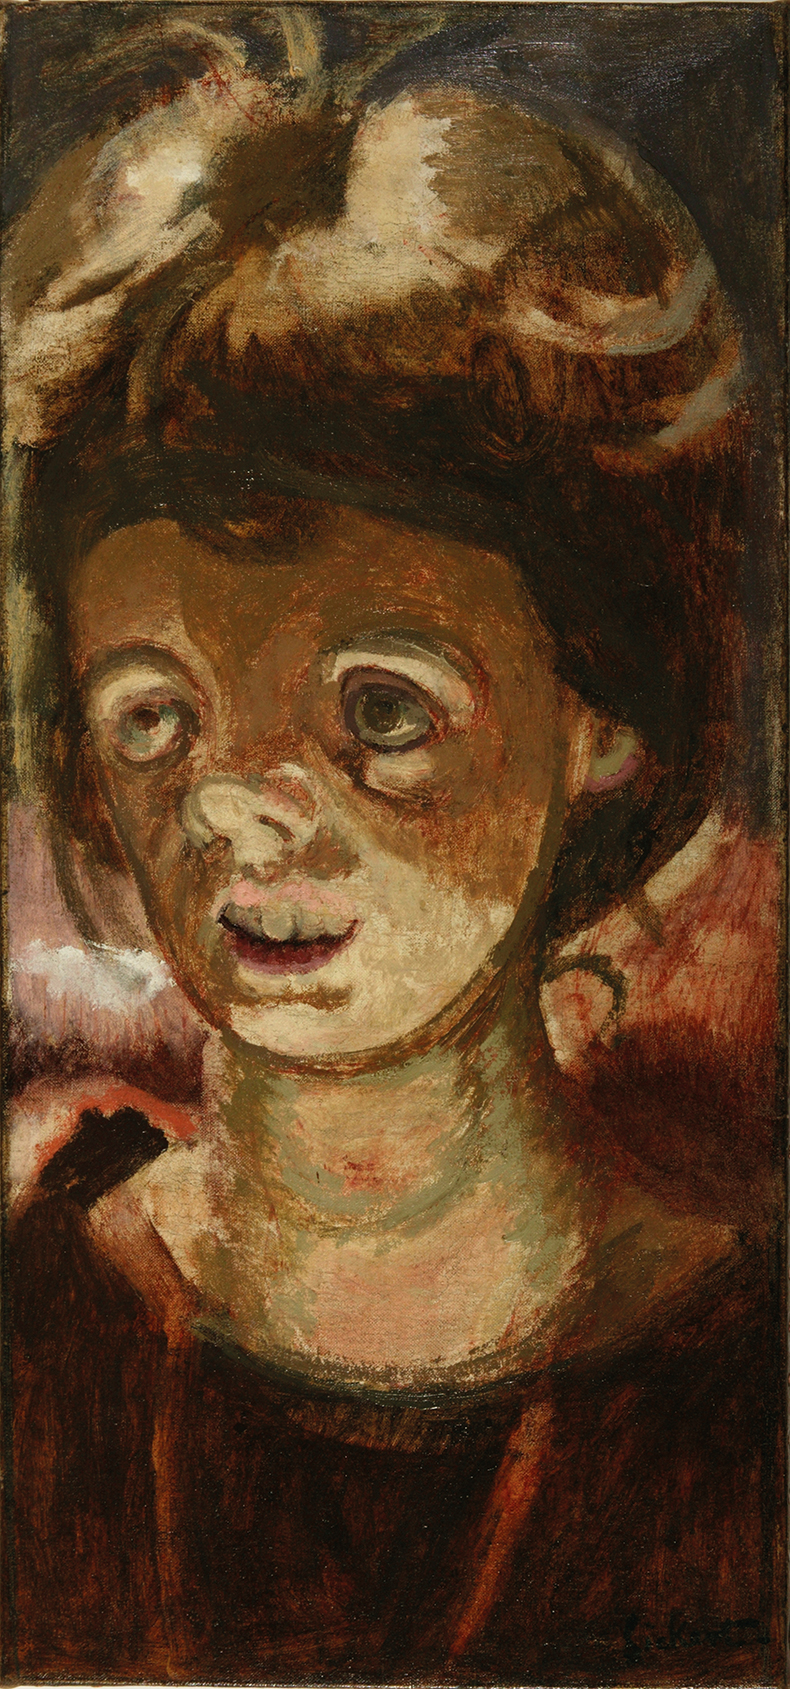 Cicely Hey (1923), Walter Sickert. The Whitworth, University of Manchester